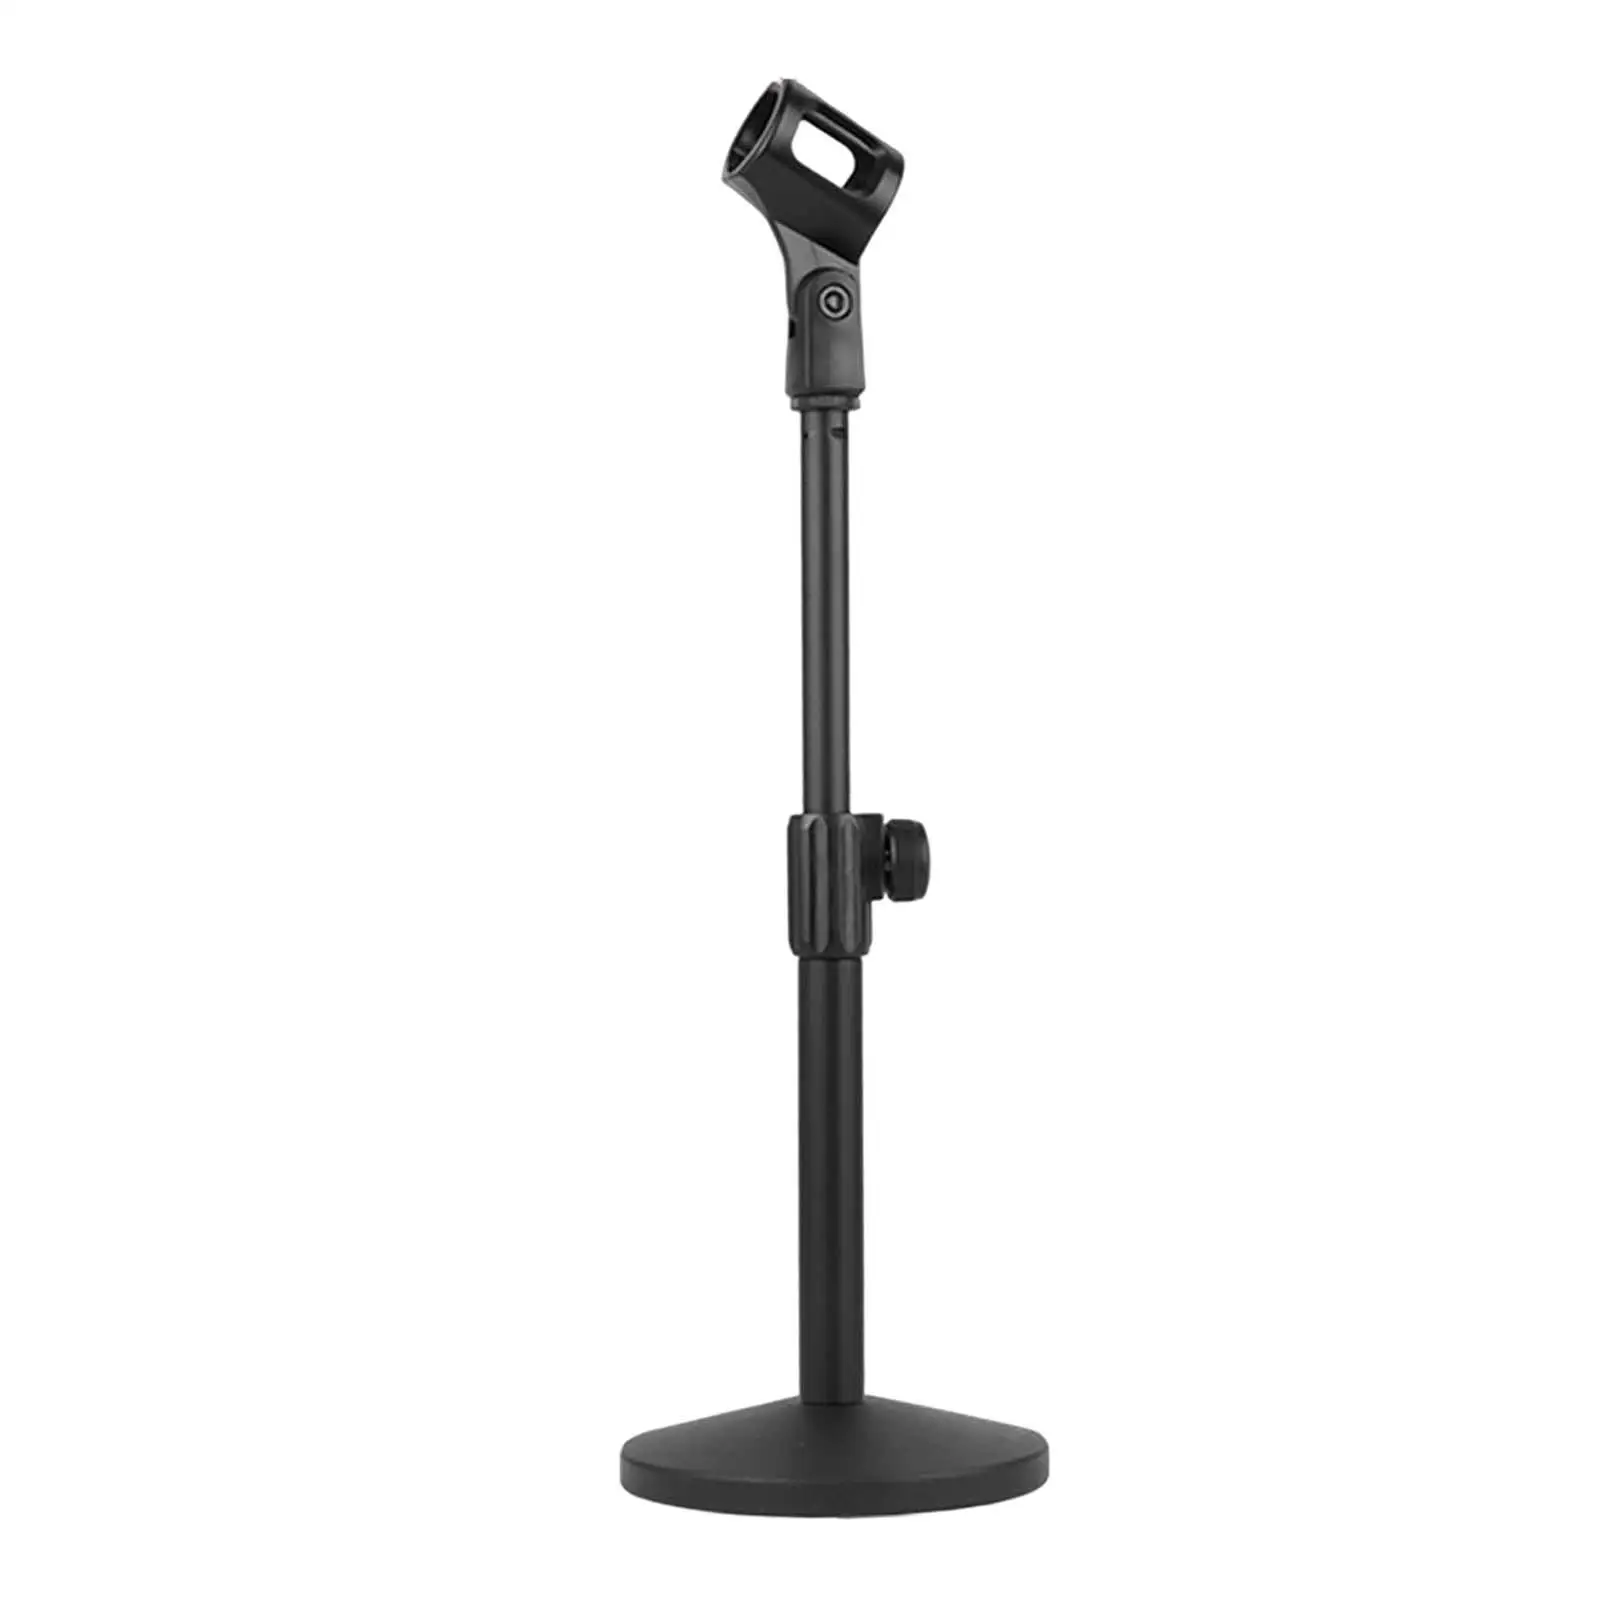 Adjustable Table Mic Stand Desktop Microphone Stand for Concert Conference Home Stage Performance